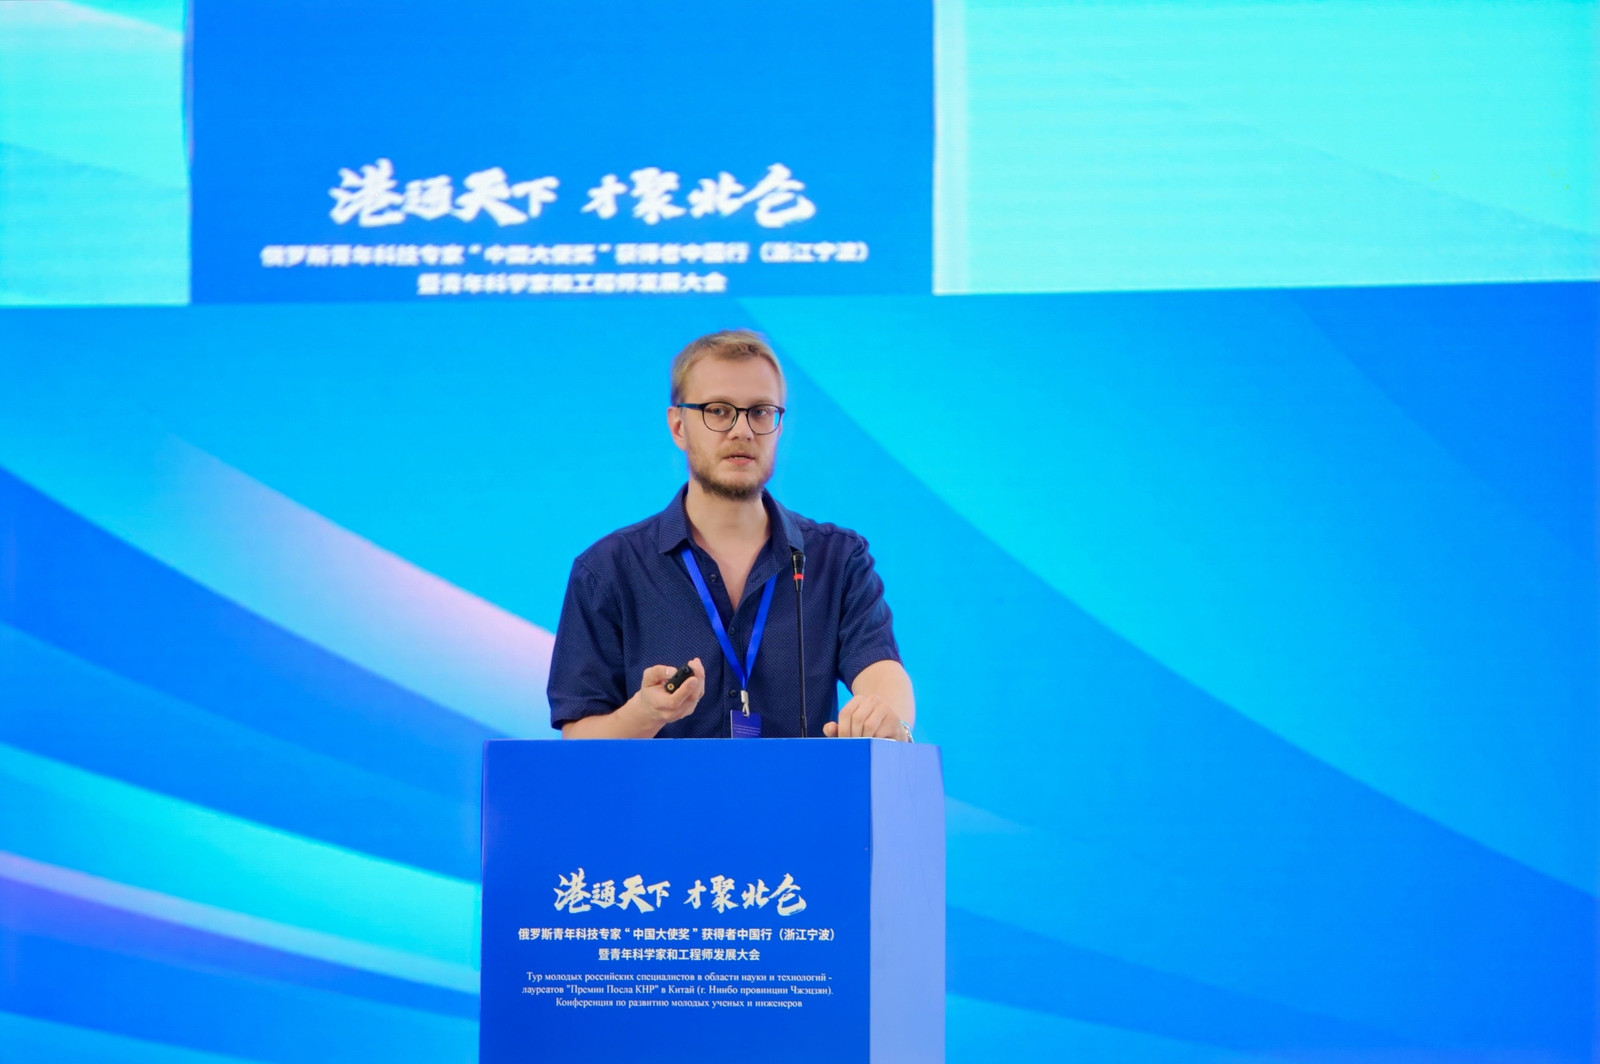 Vadim Moshkin, a young scientist of UlSTU, made a report at a forum in China on the topic of artificial intelligence